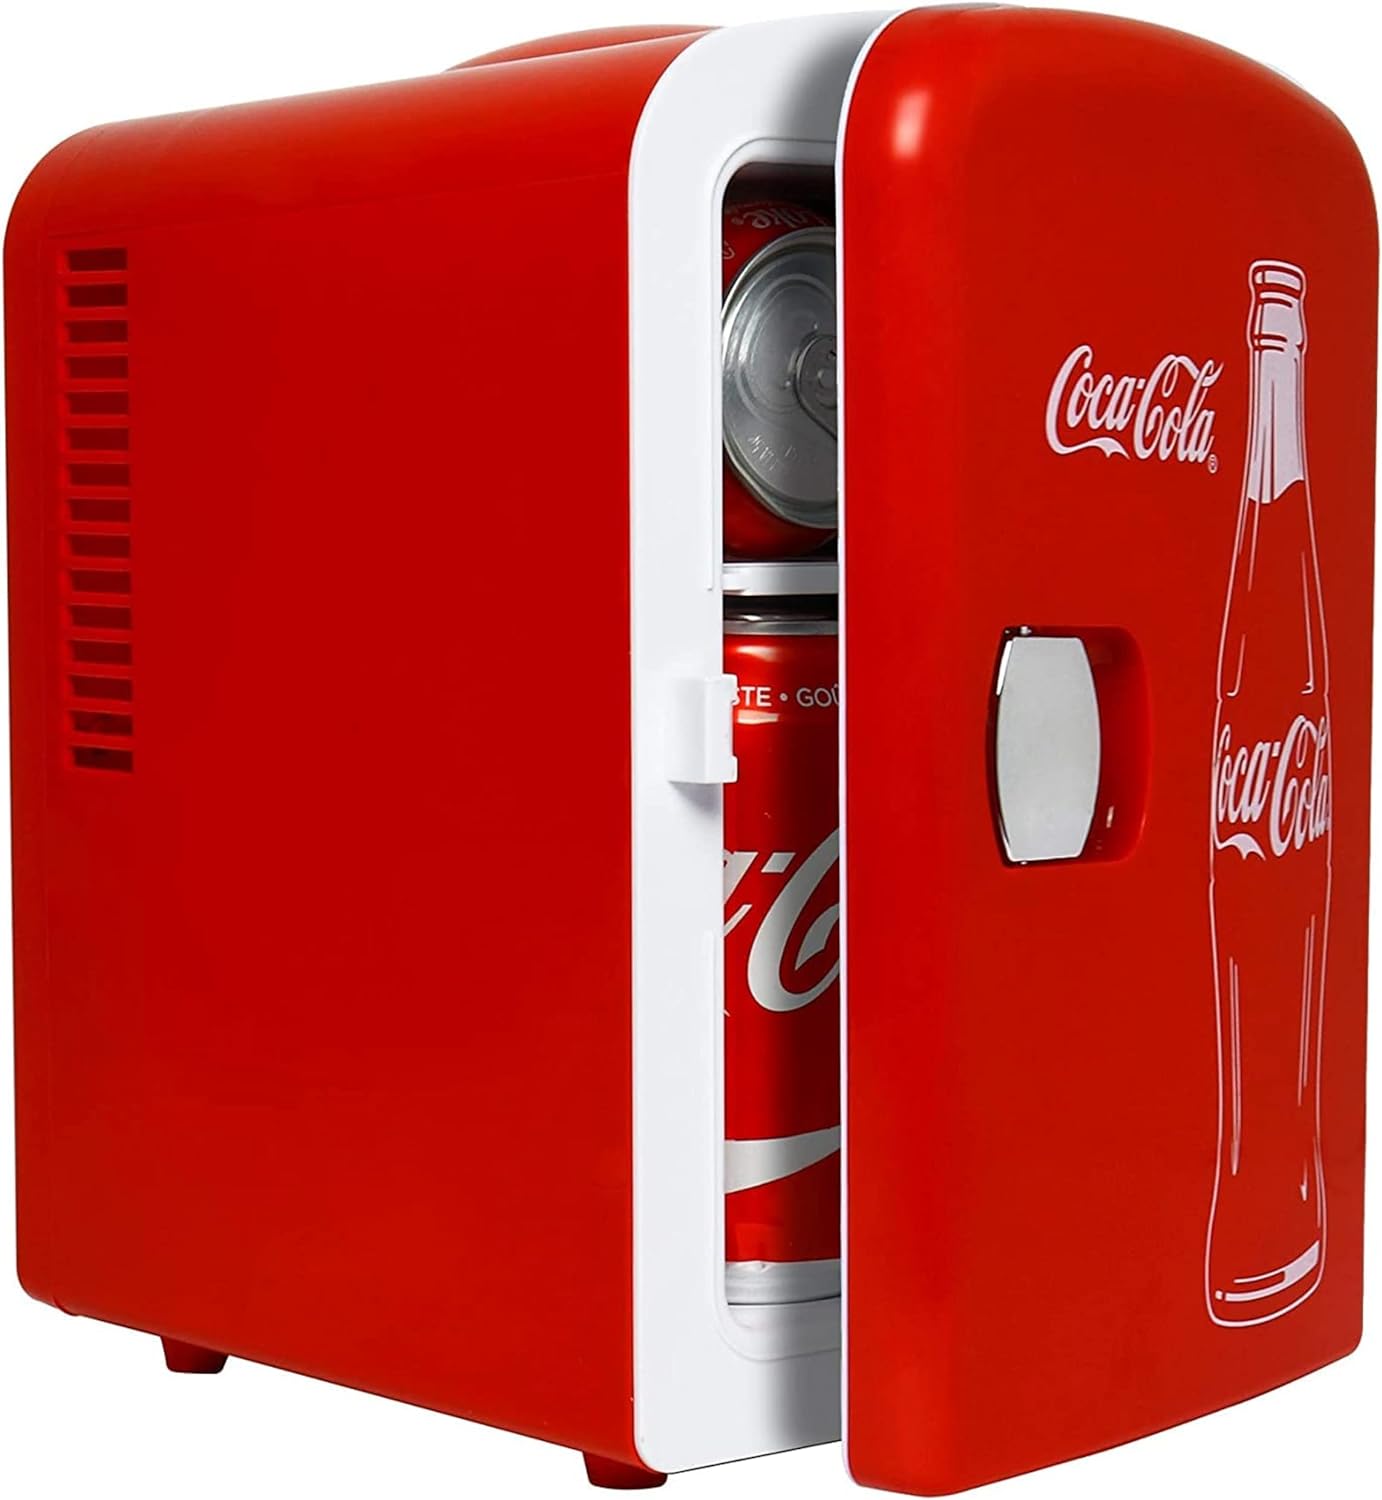 Koolatron Coca Cola Mini Fridge 4 L/6 Can Portable Cooler Refrigerator for Food Beverages Drinks Skincare Snacks Home Bedroom Office Dorm Travel Car Boat, AC DC Plugs Included, Red Coke Bottle [Energy Class A]